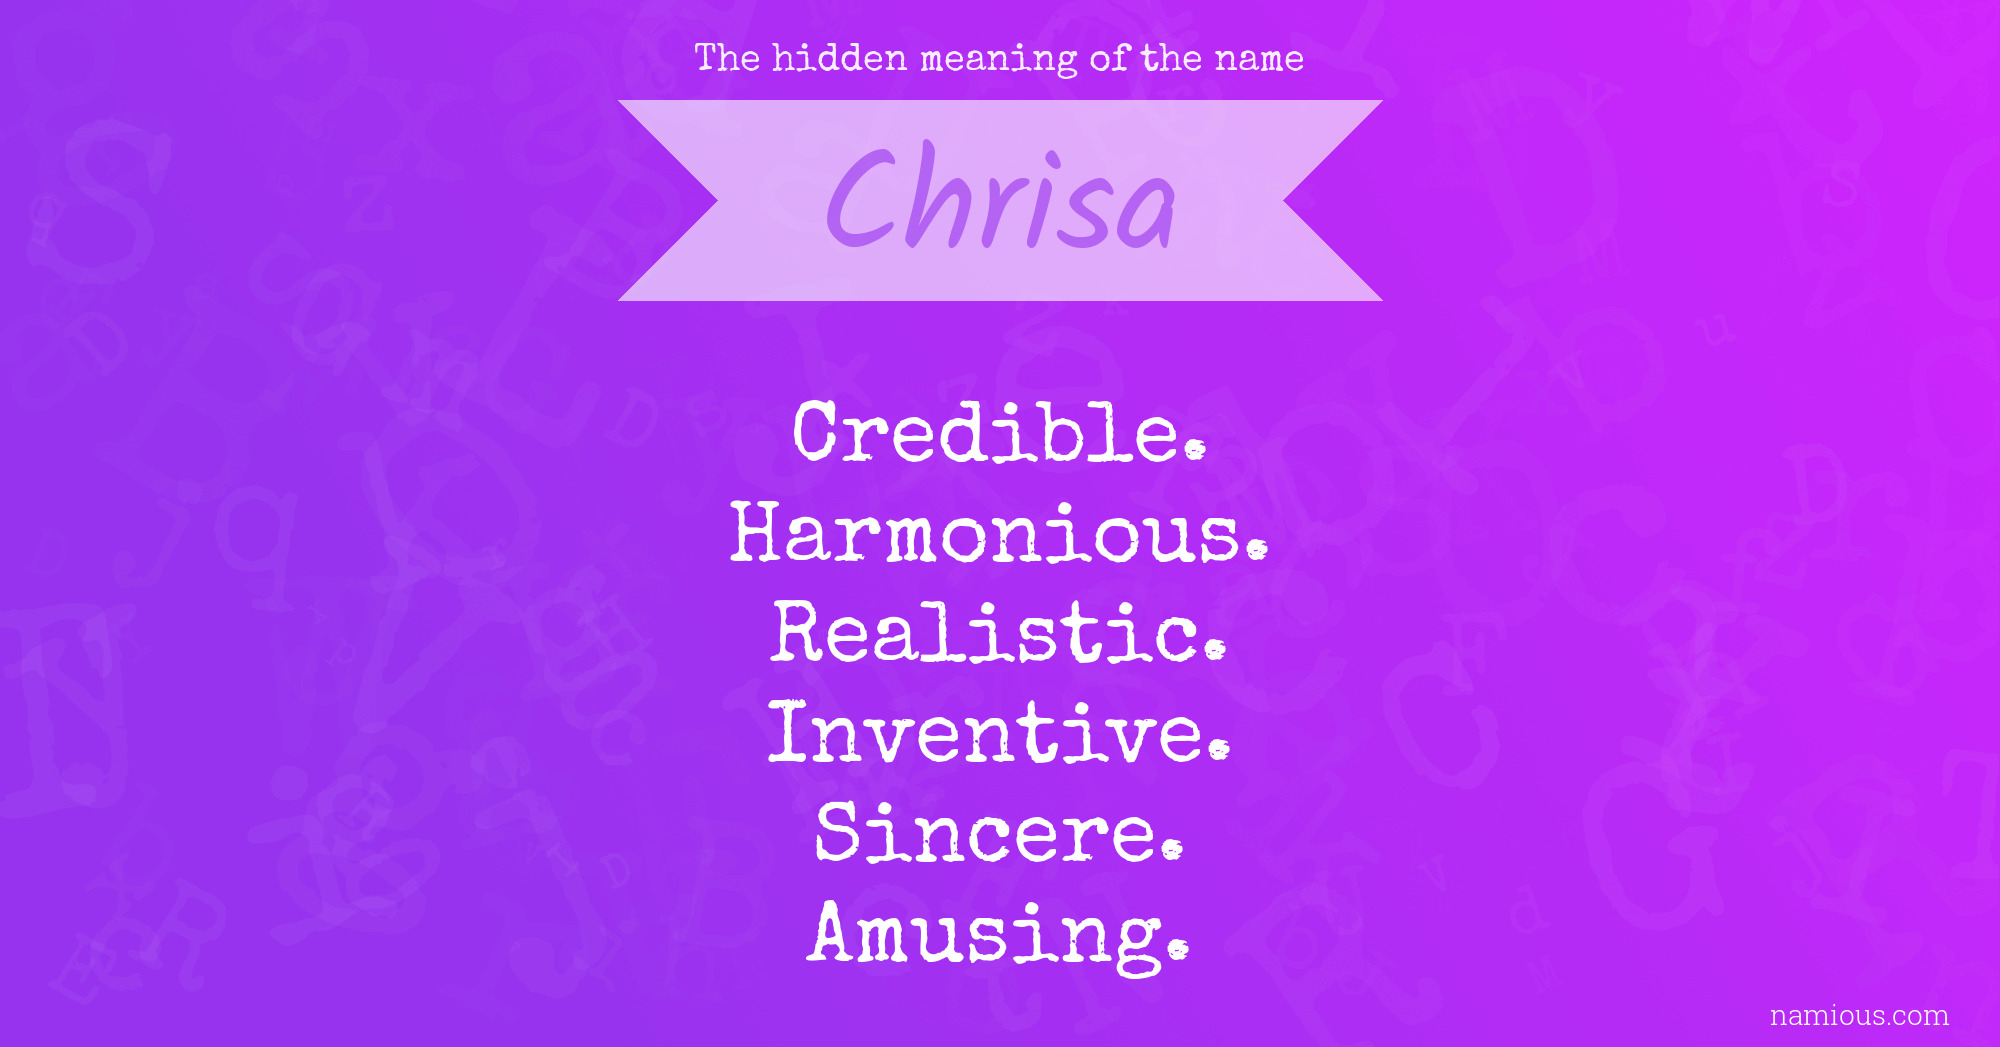 The hidden meaning of the name Chrisa